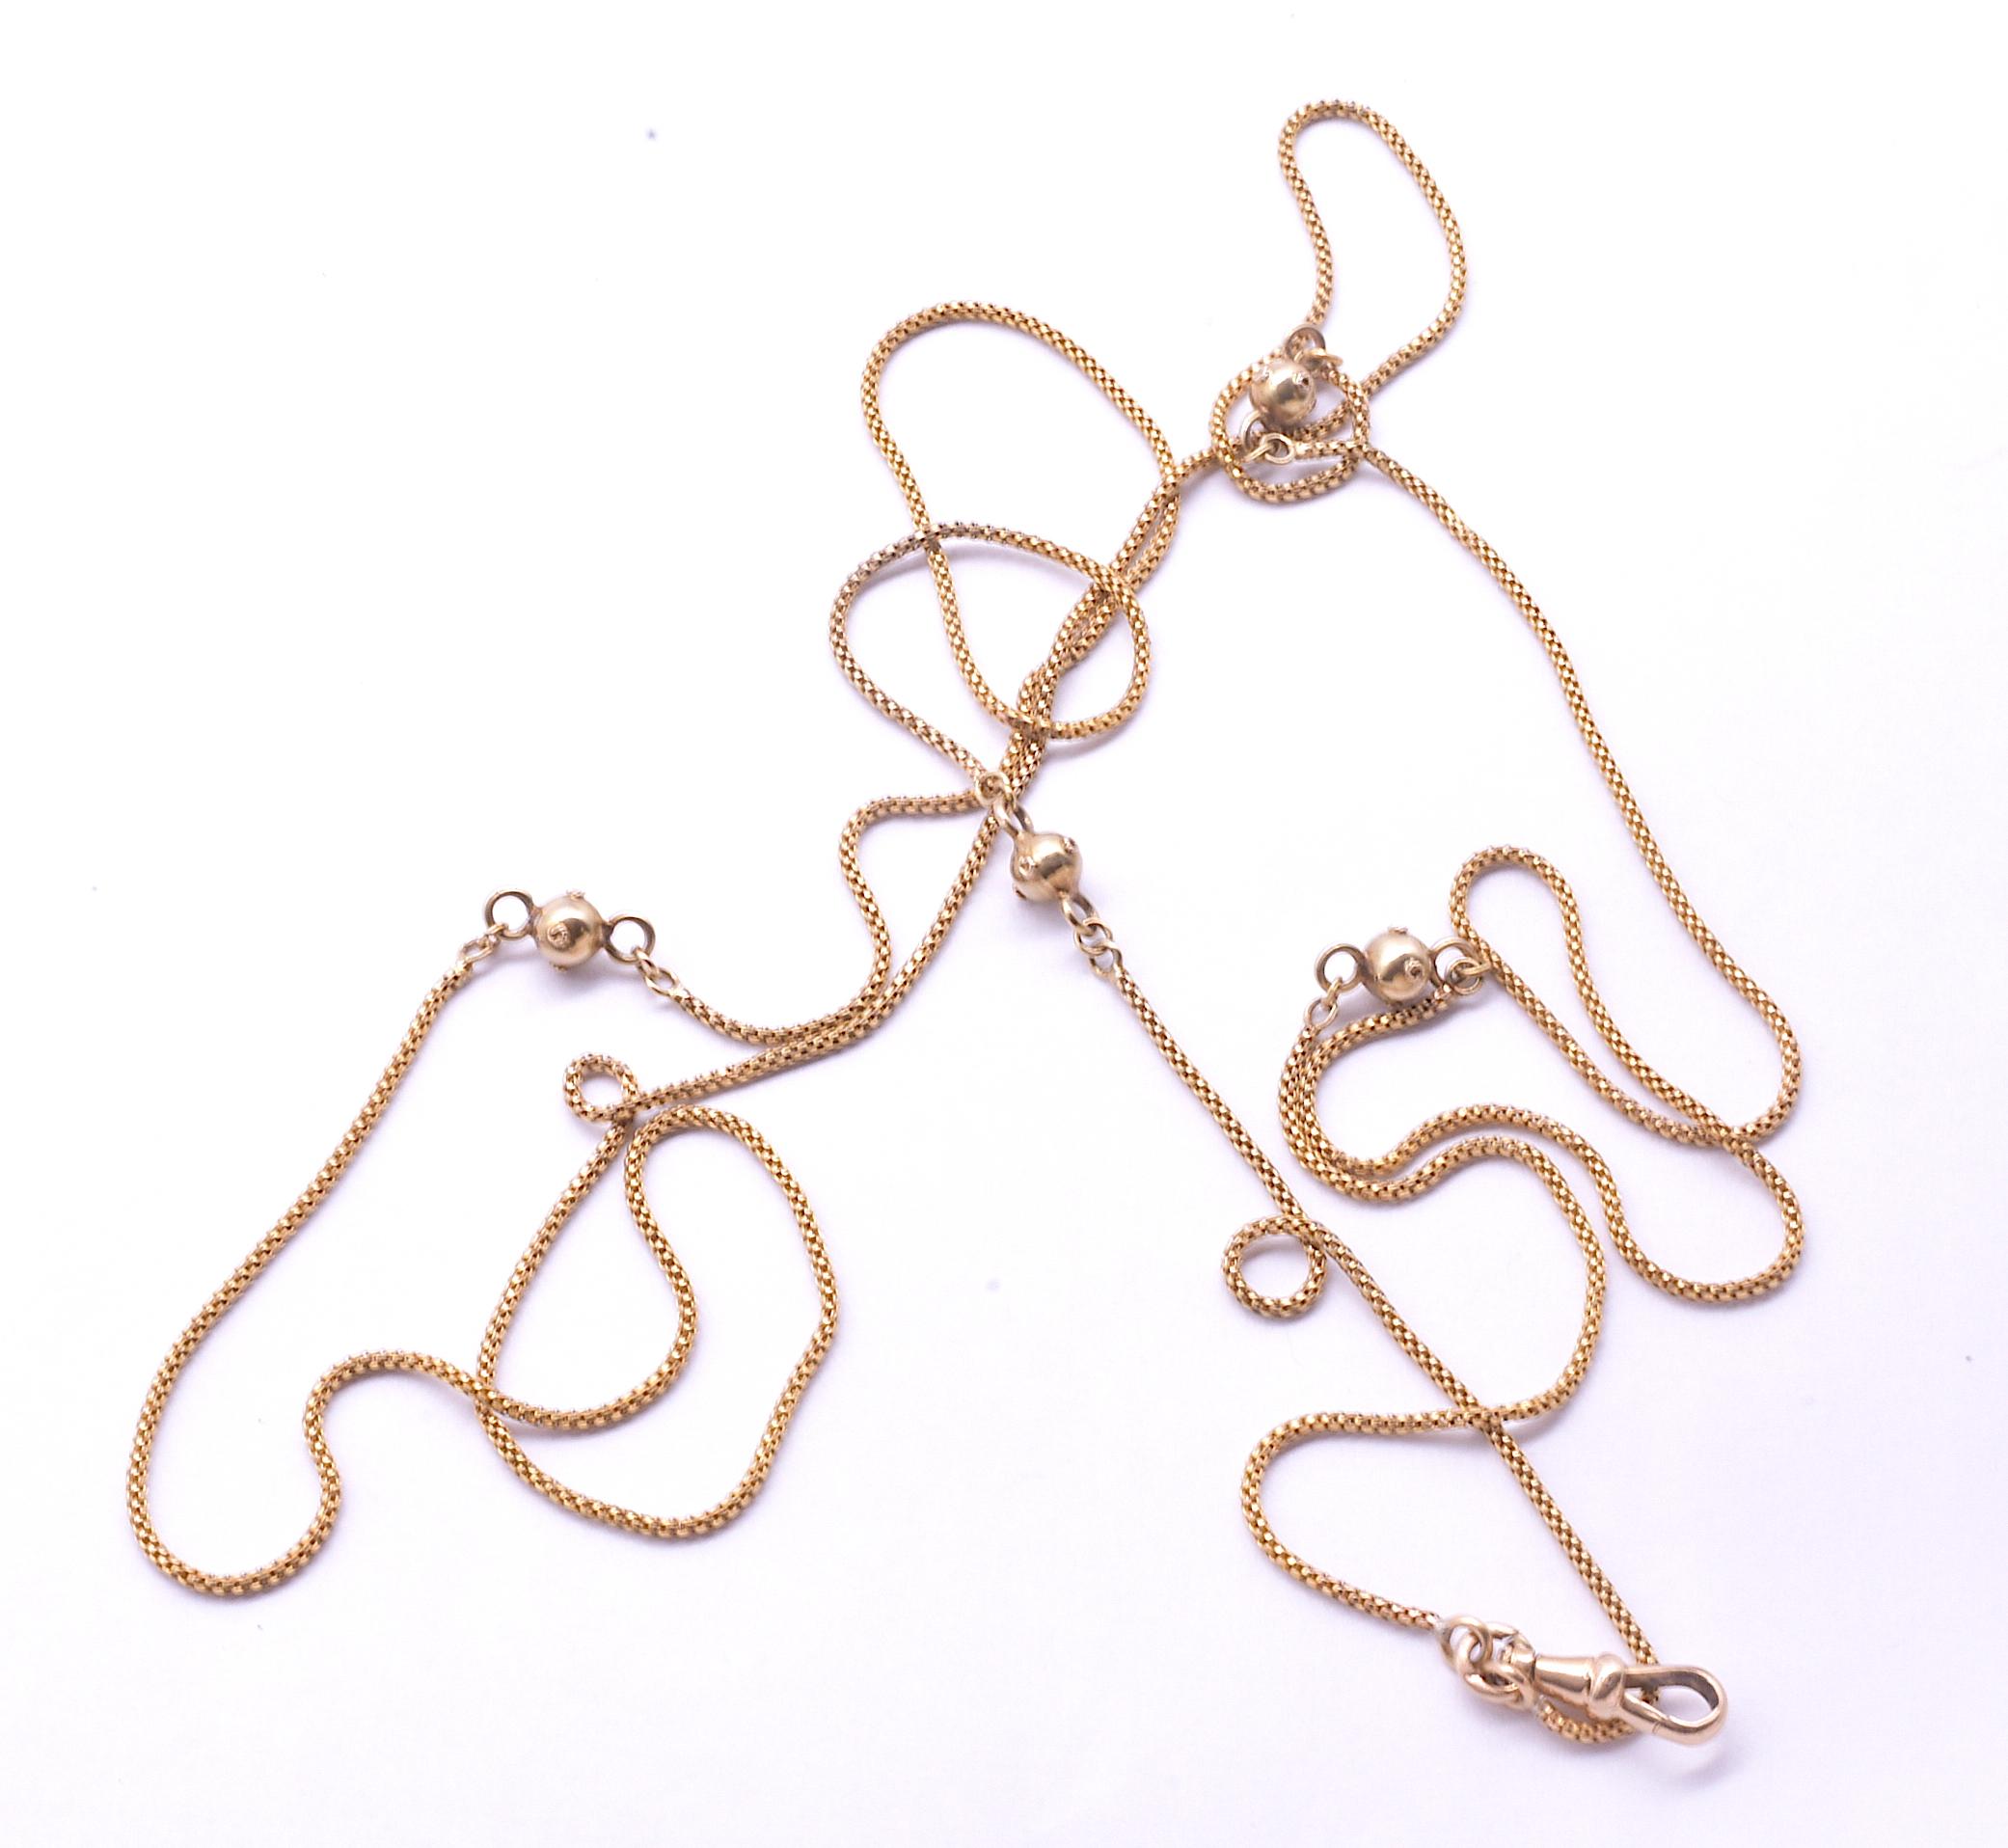 Our lightweight Victorian 15K rope chain has 2 sets of symmetrically placed balls set equidistant down the length of a chain, and feels wonderful. Nineteenth century chains were hand worked and fashioned laboriously; note the details such as the